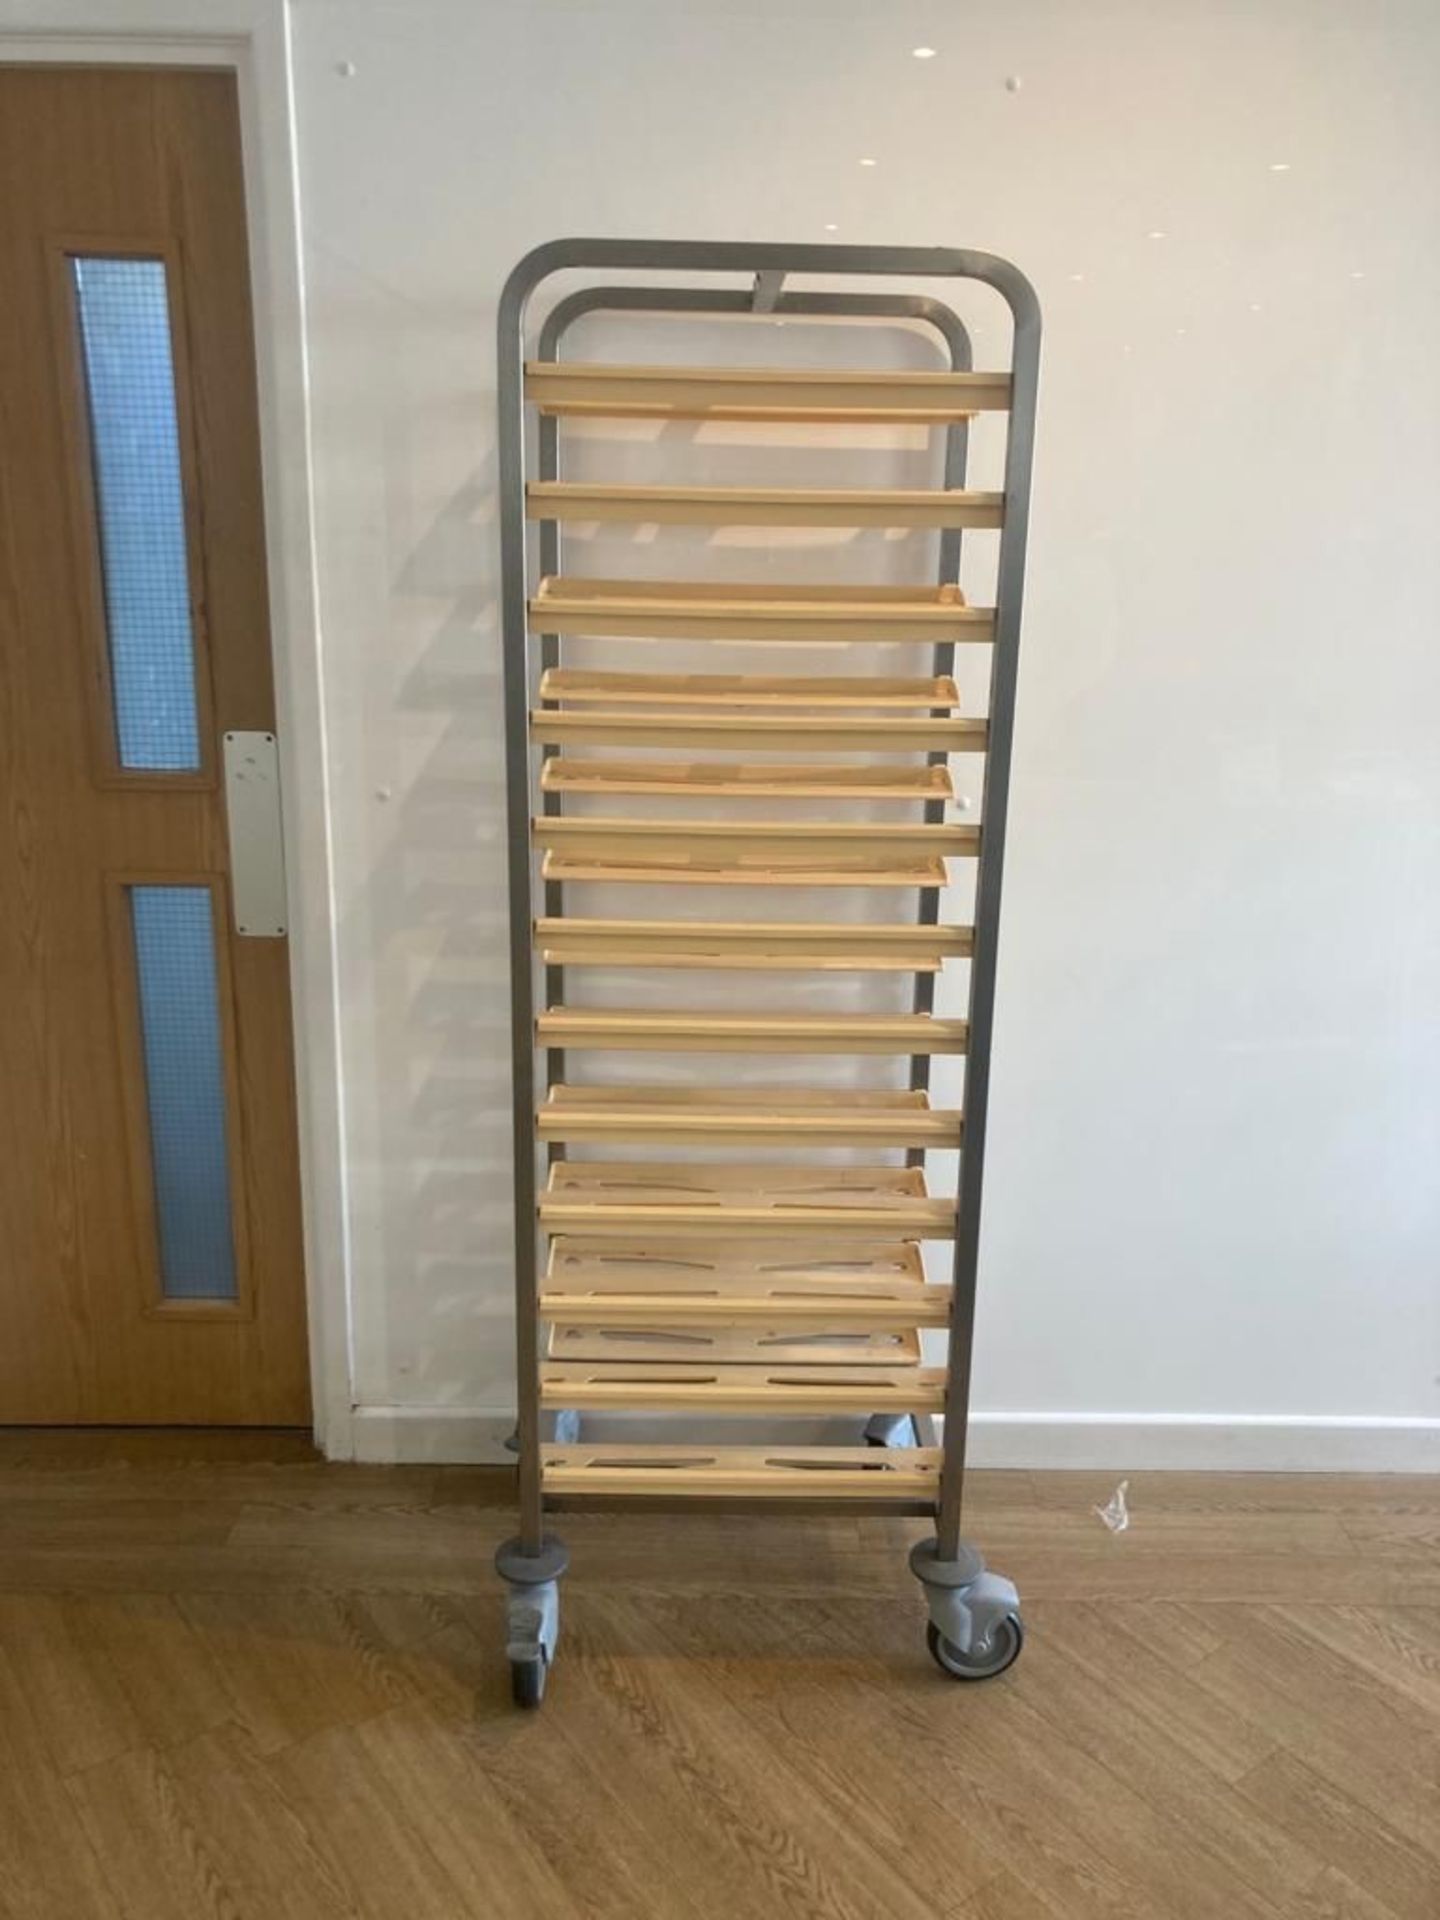 Stainless Steel Trolley With Wooden Shelving